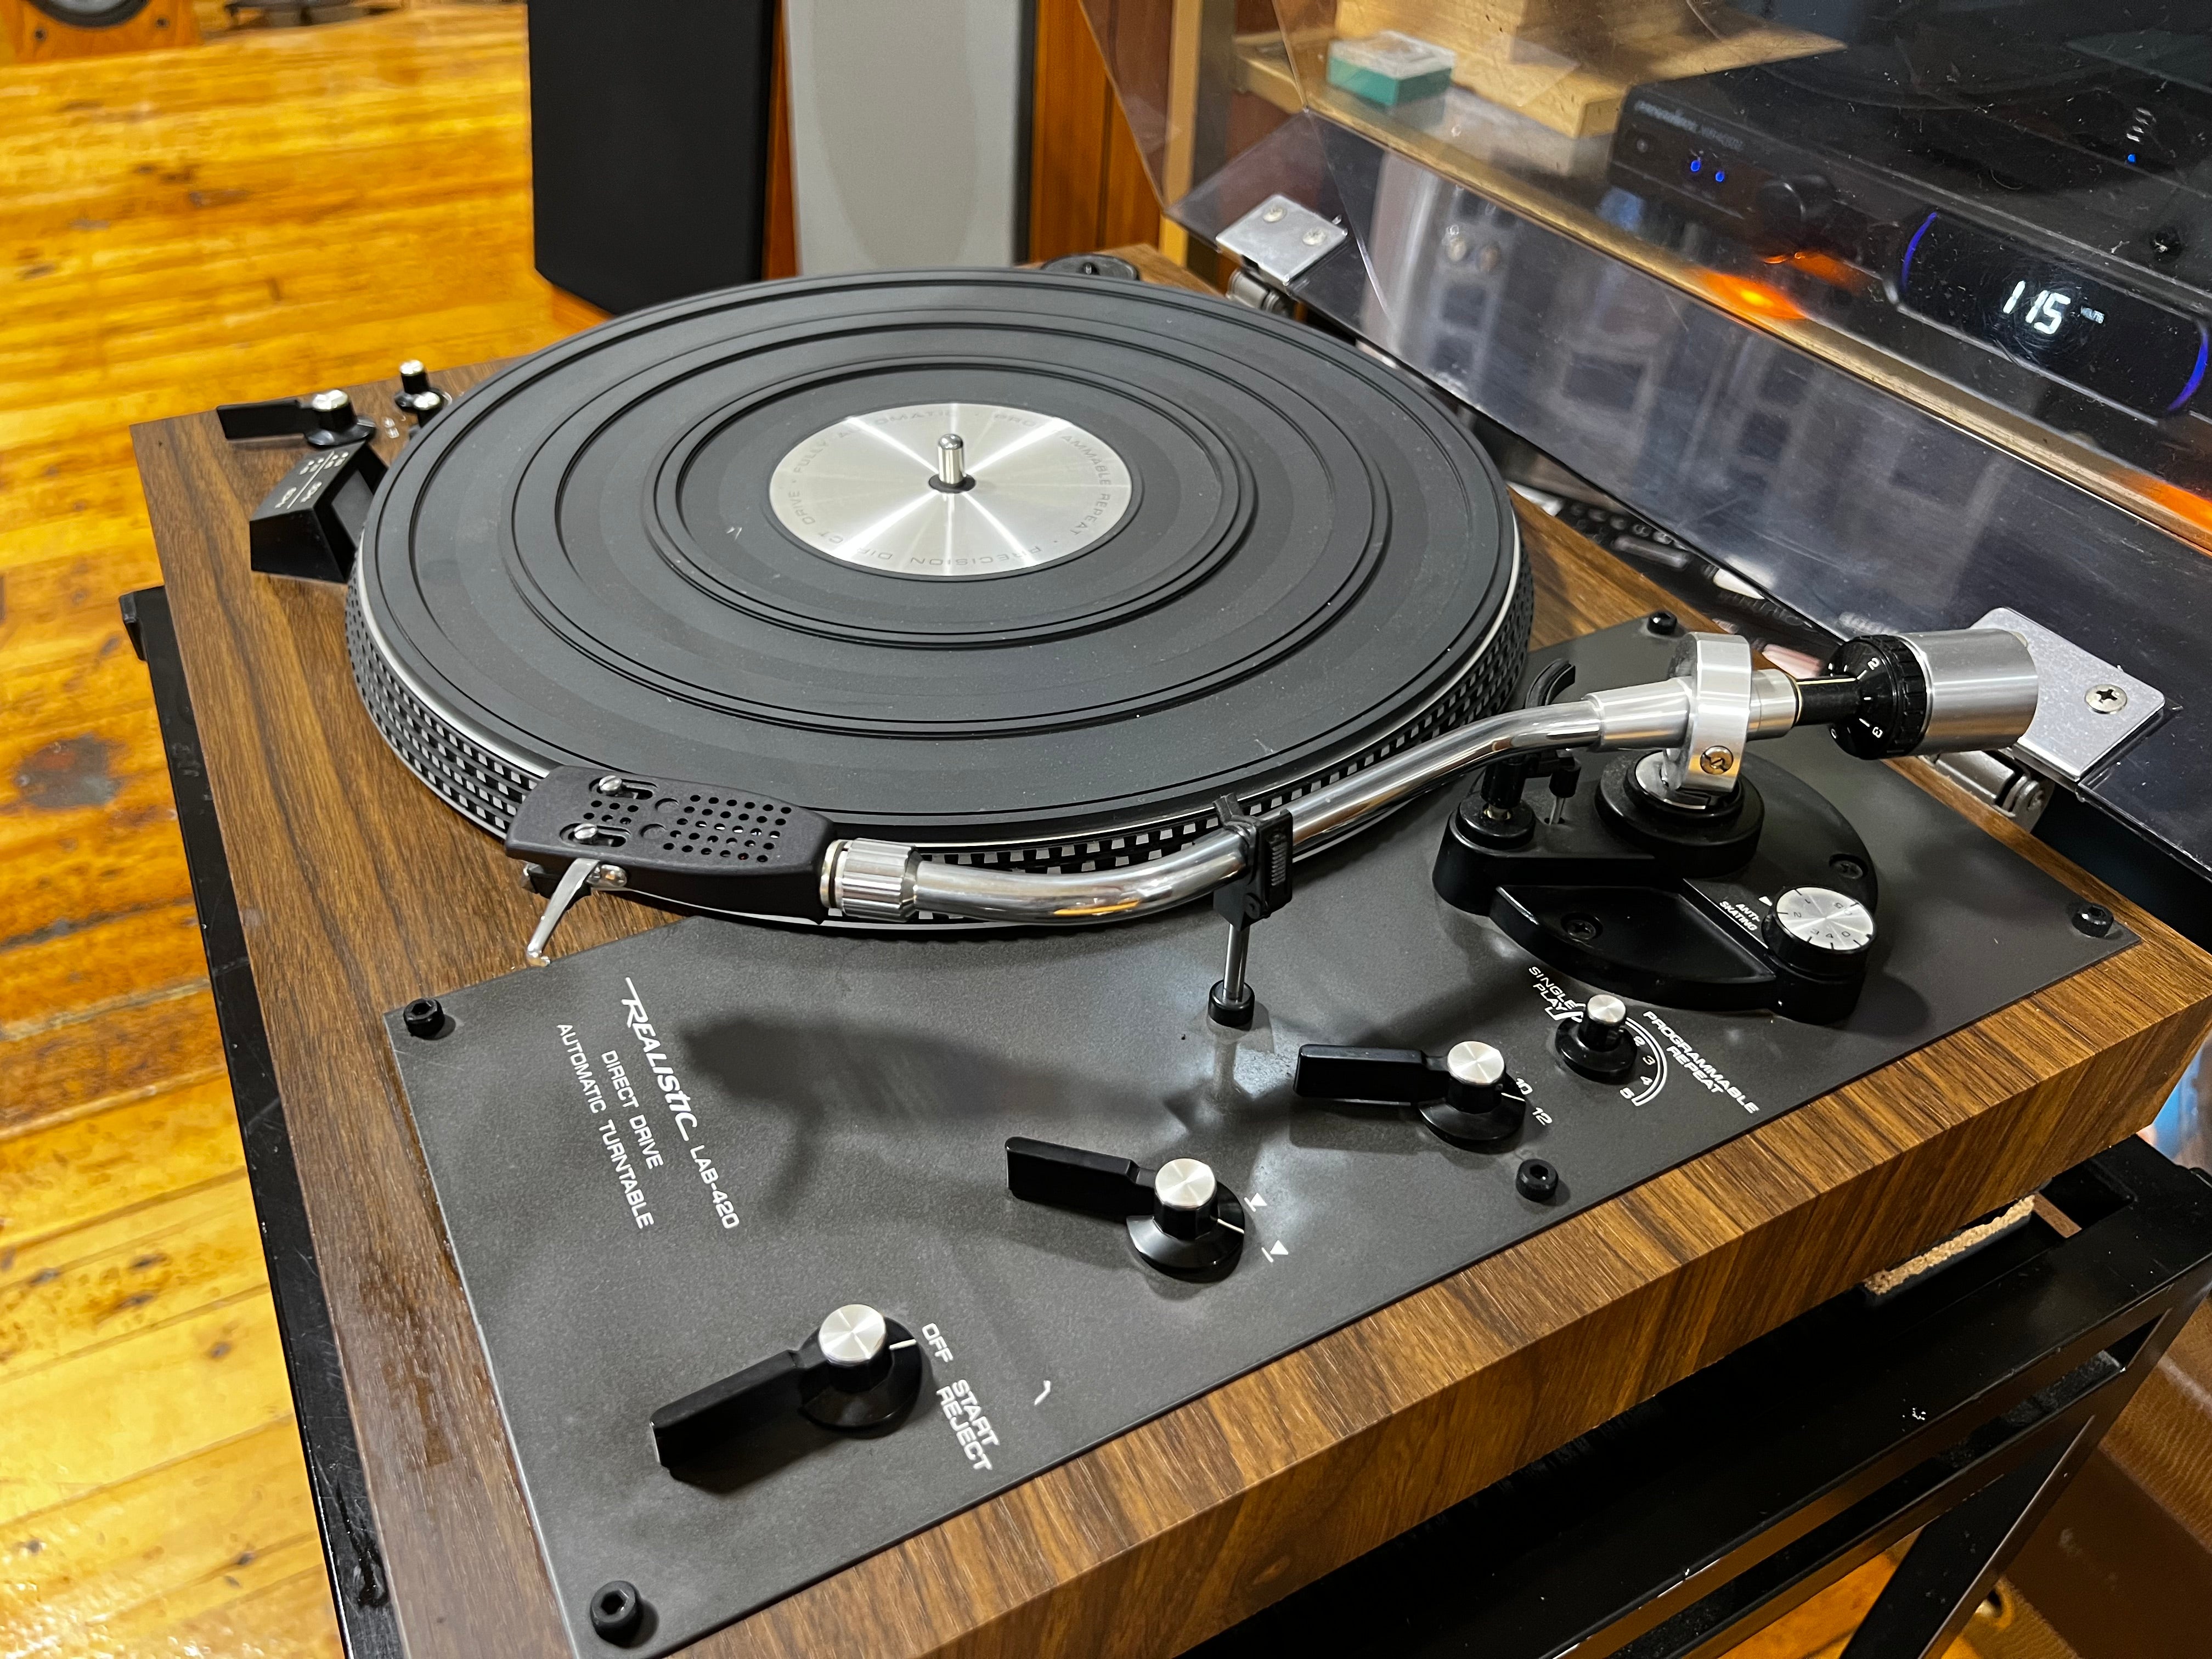 Realistic LAB-420 Turntable, Shure V15 RS Cart